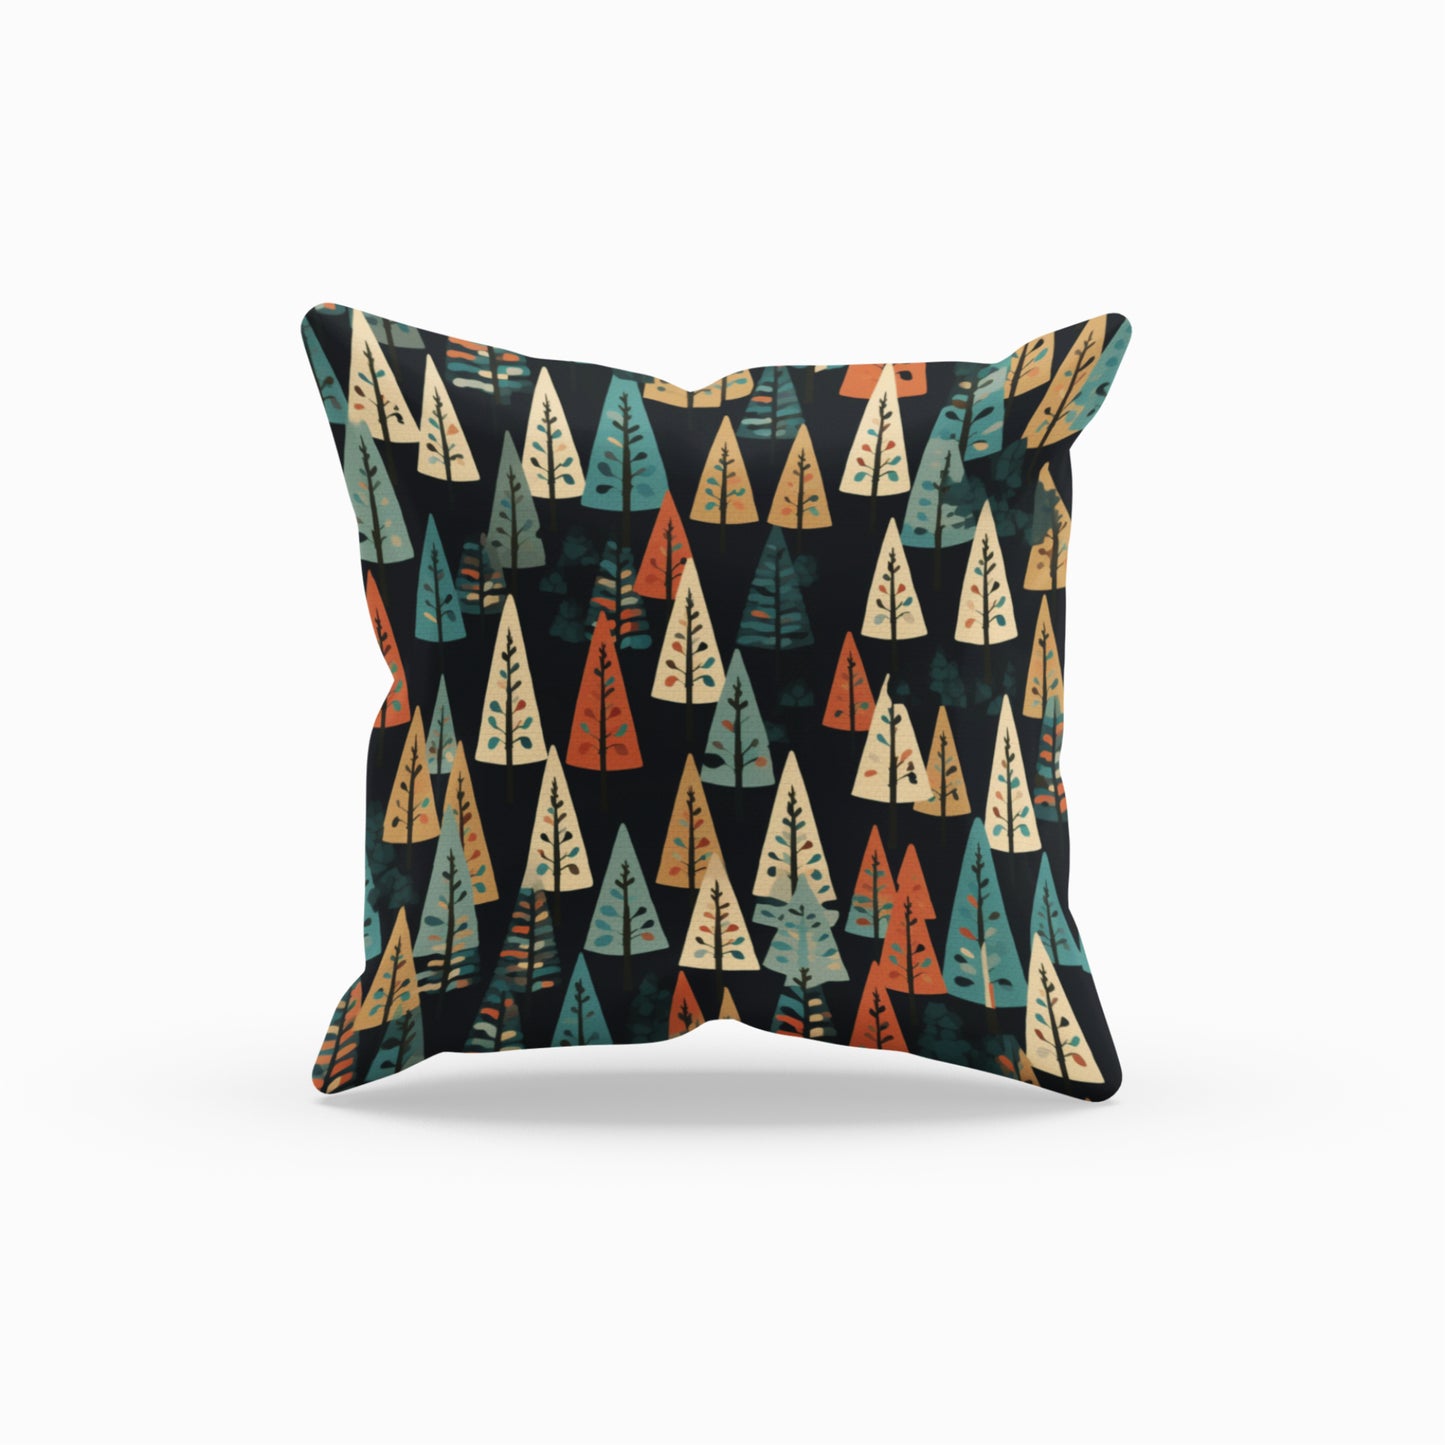 Homeezone's Winter Forest Throw Pillow